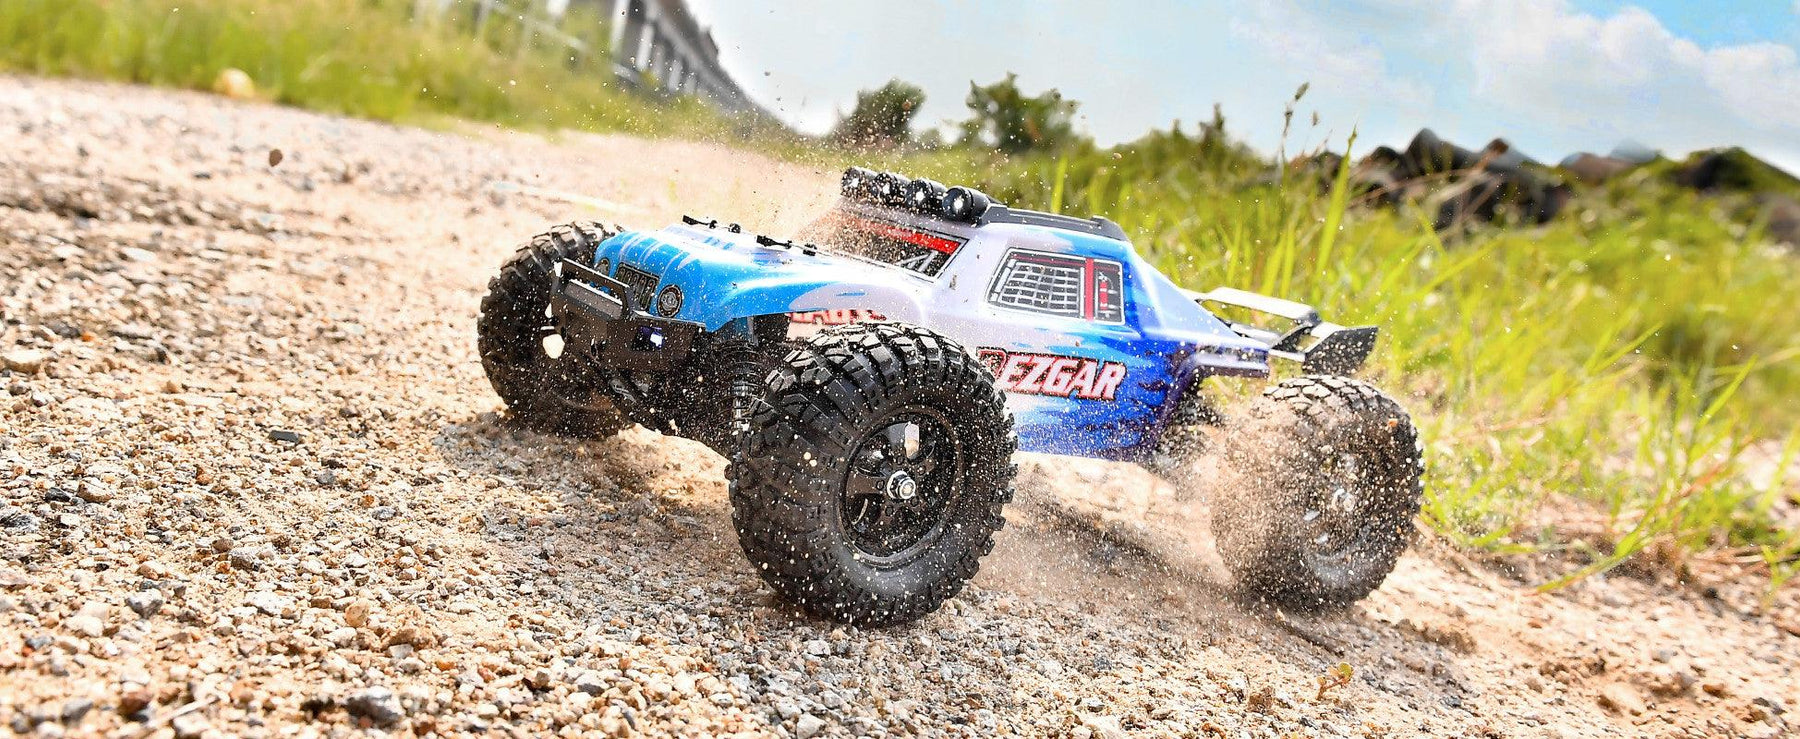 The Best Christmas Gifts for Remote Control Car Enthusiasts